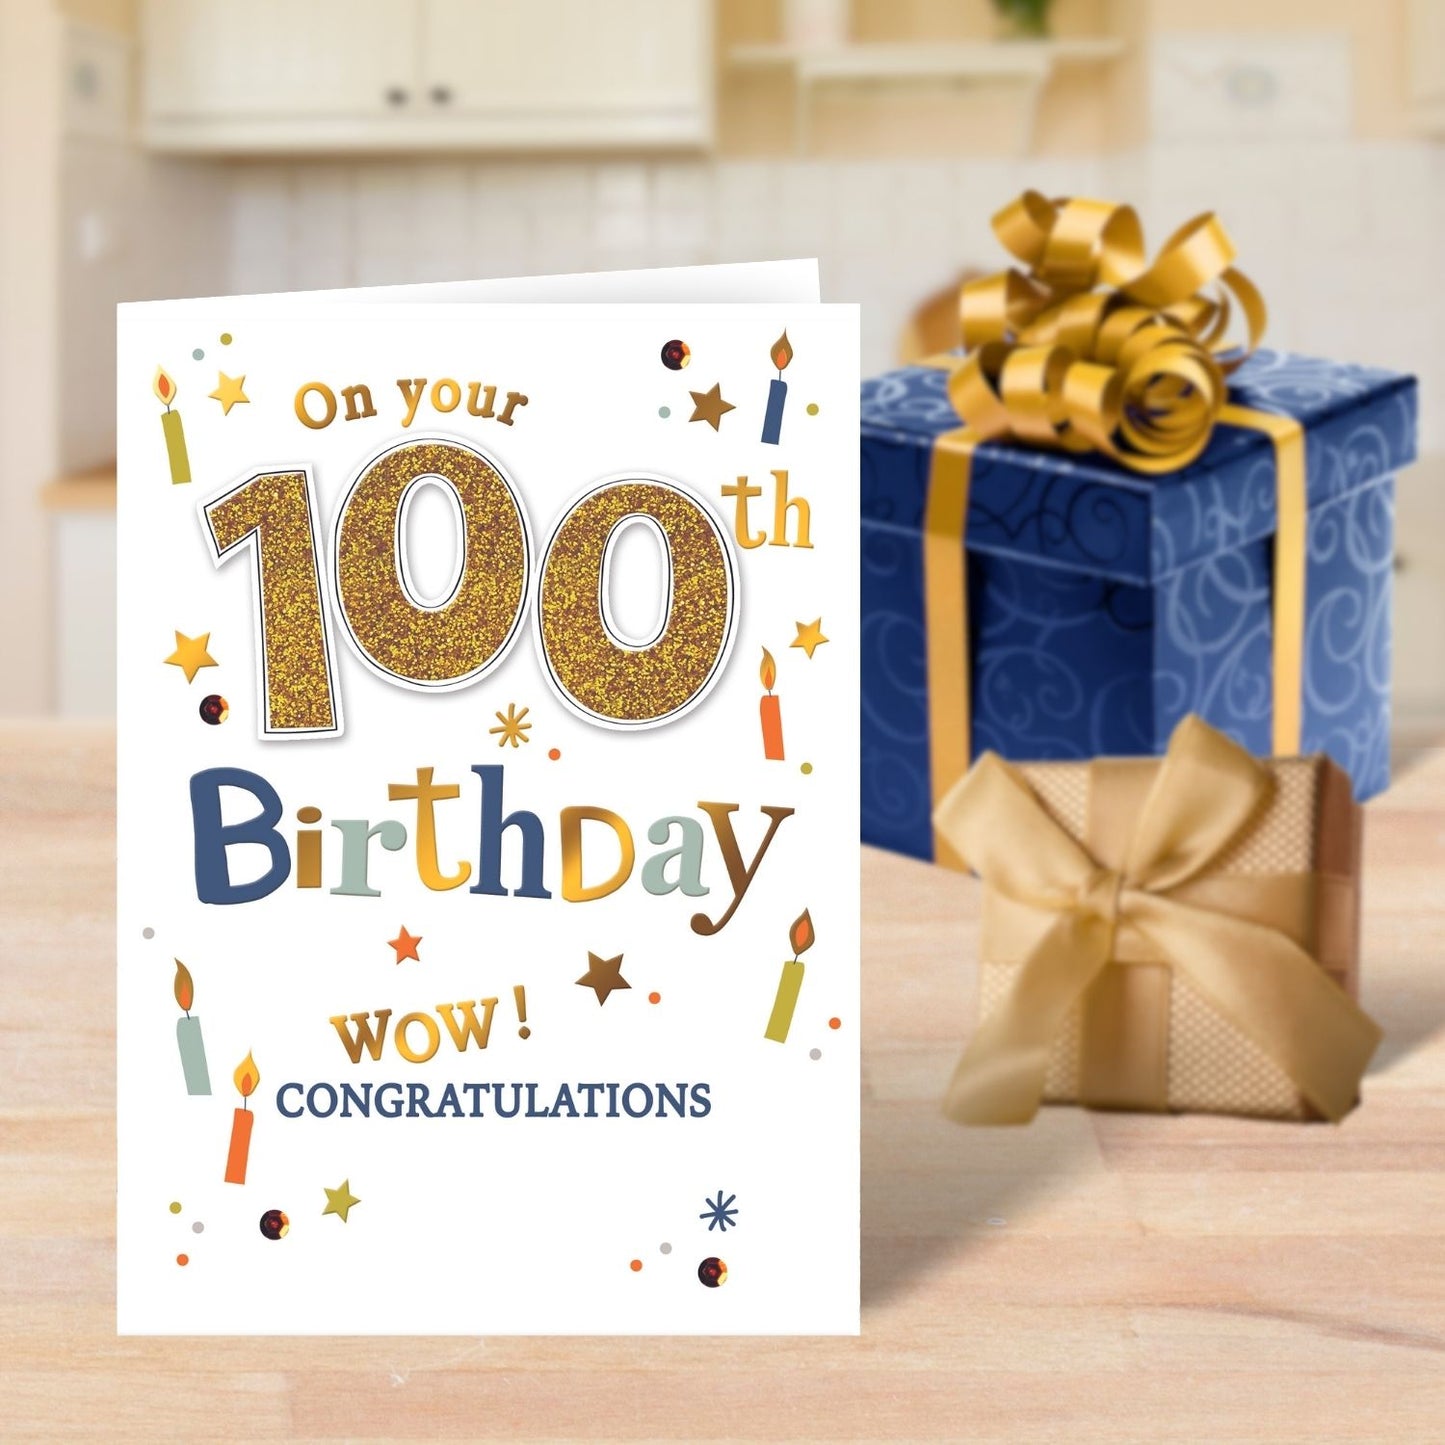 On Your 100th Birthday Greeting Card